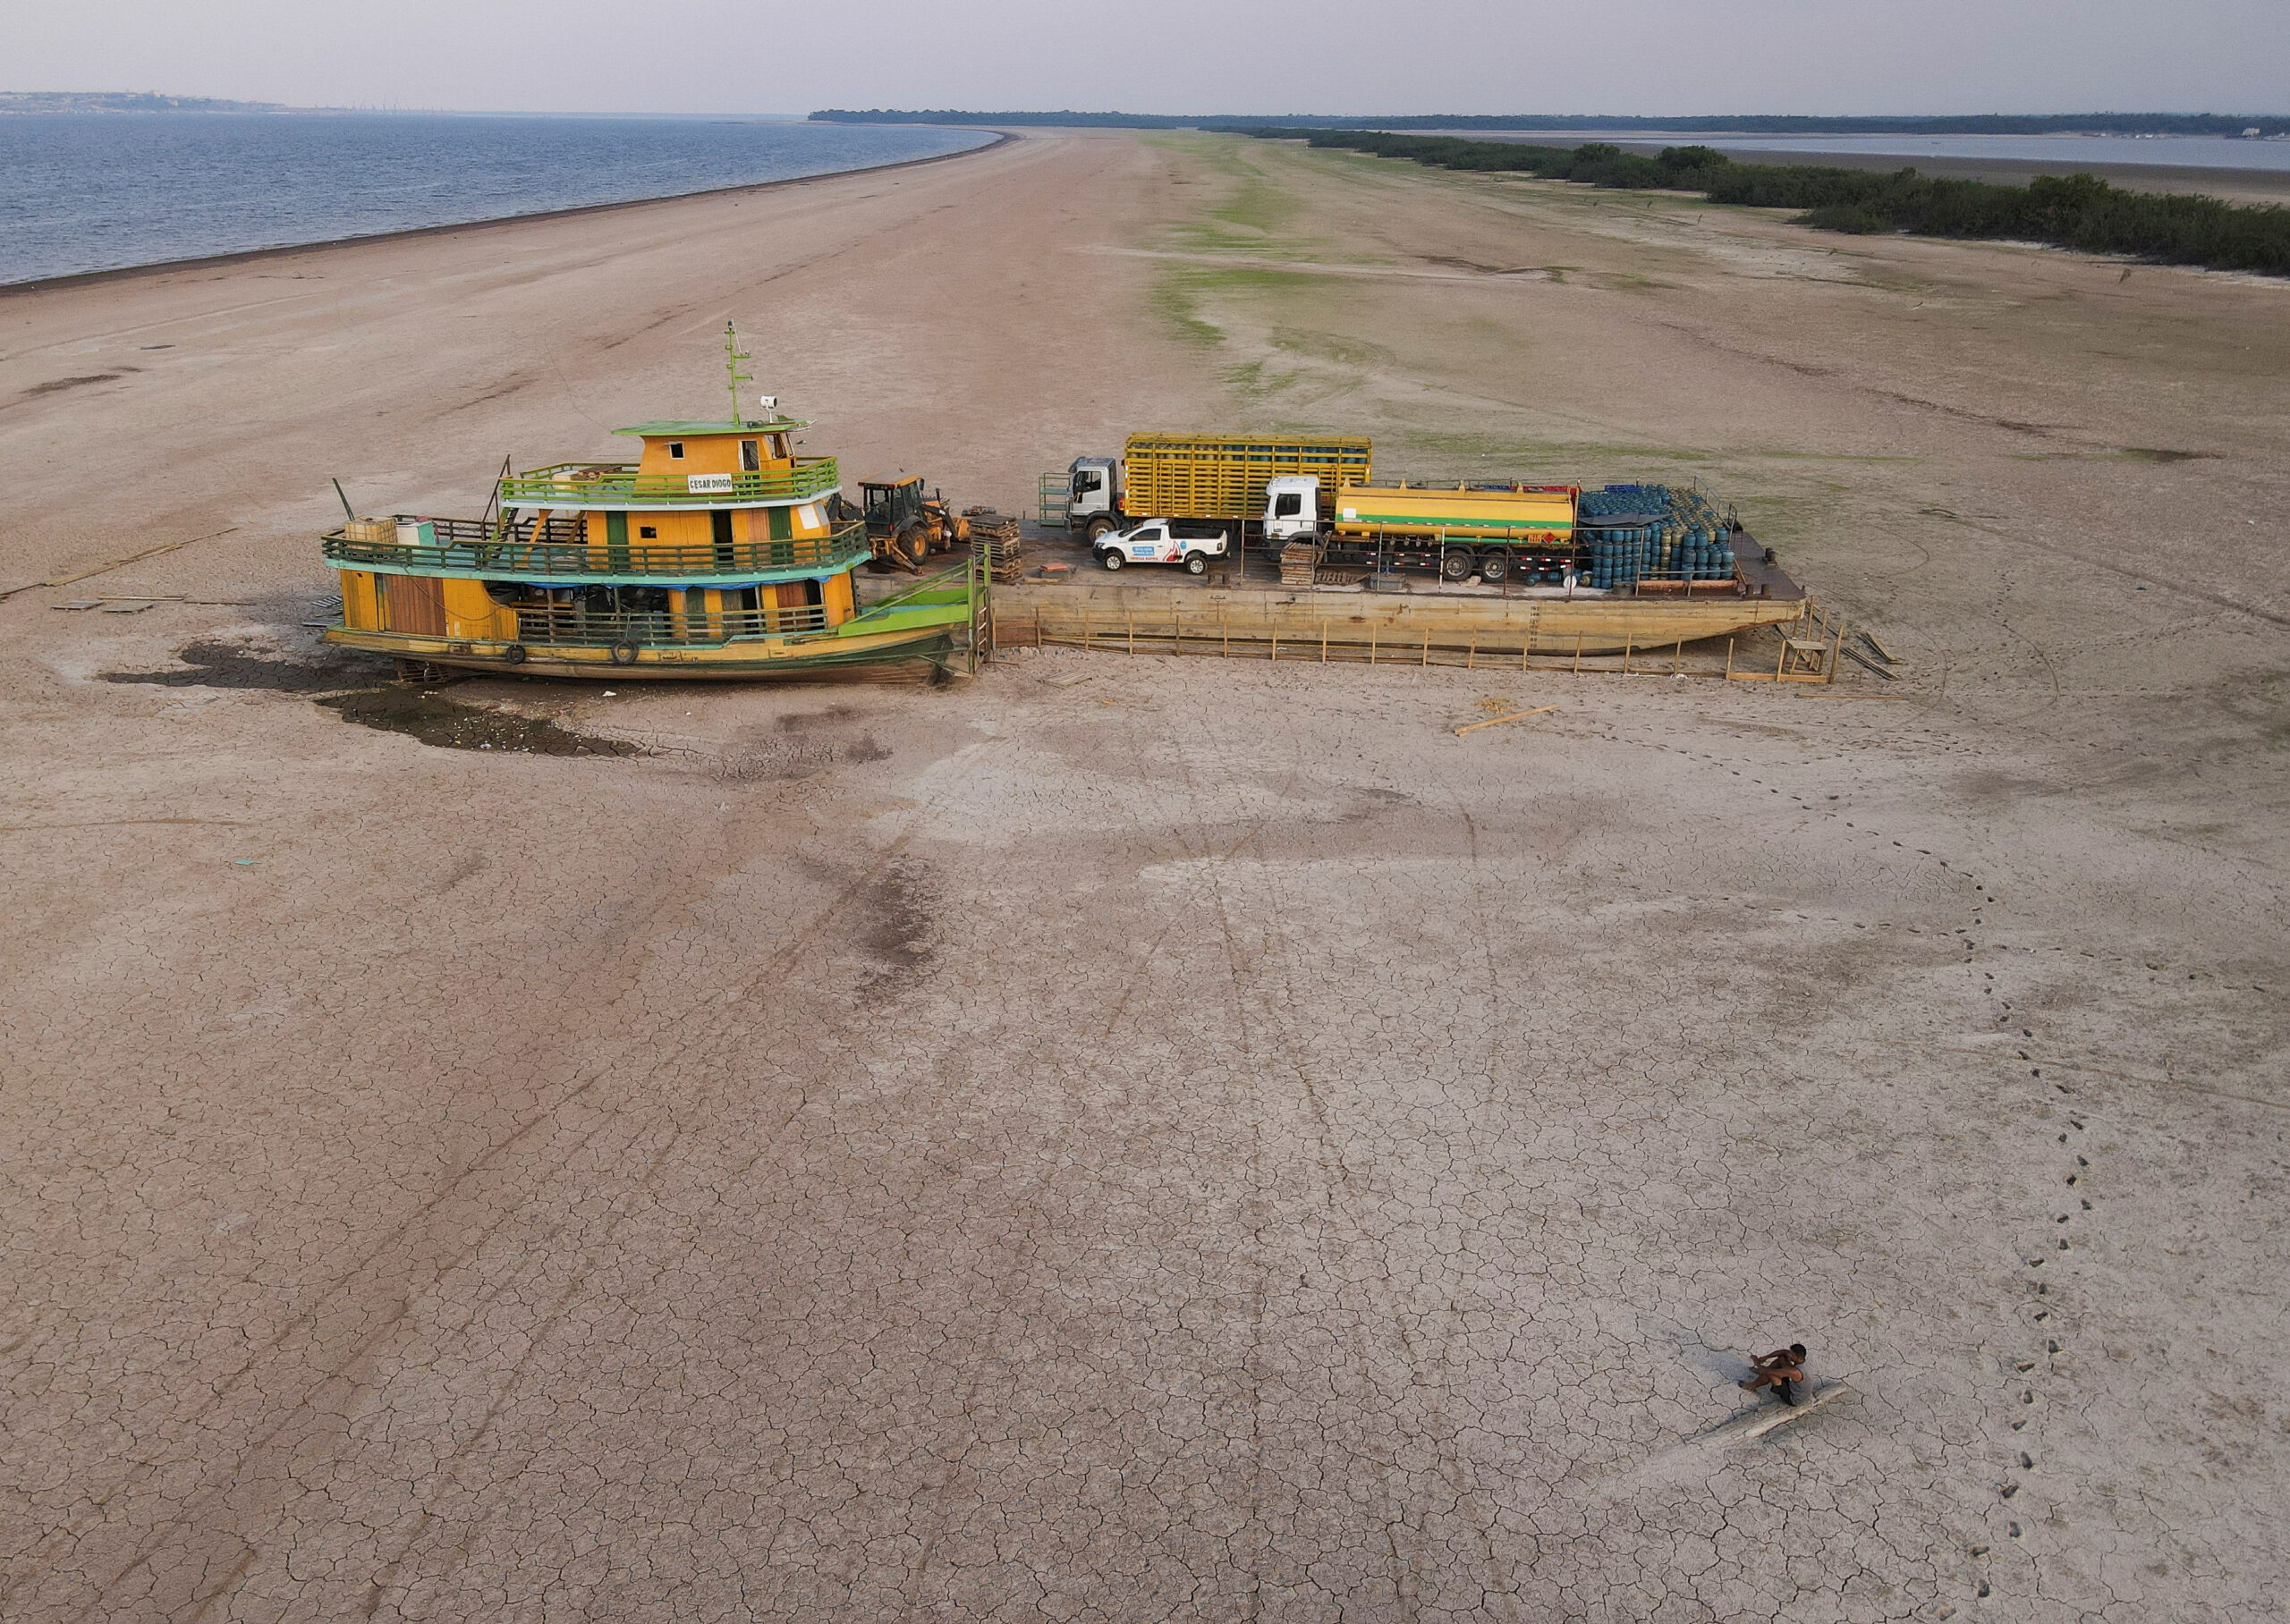 A tug boat and a barge carrying three trucks, 2,000 empty cooking gas cylinders and a backhoe, lie stranded on a sand bank of a diminished Rio Negro river after running aground last month, as the region is hit by a severe drought, in Cacau Pirera, Brazil October 10, 2023. REUTERS/Bruno Kelly